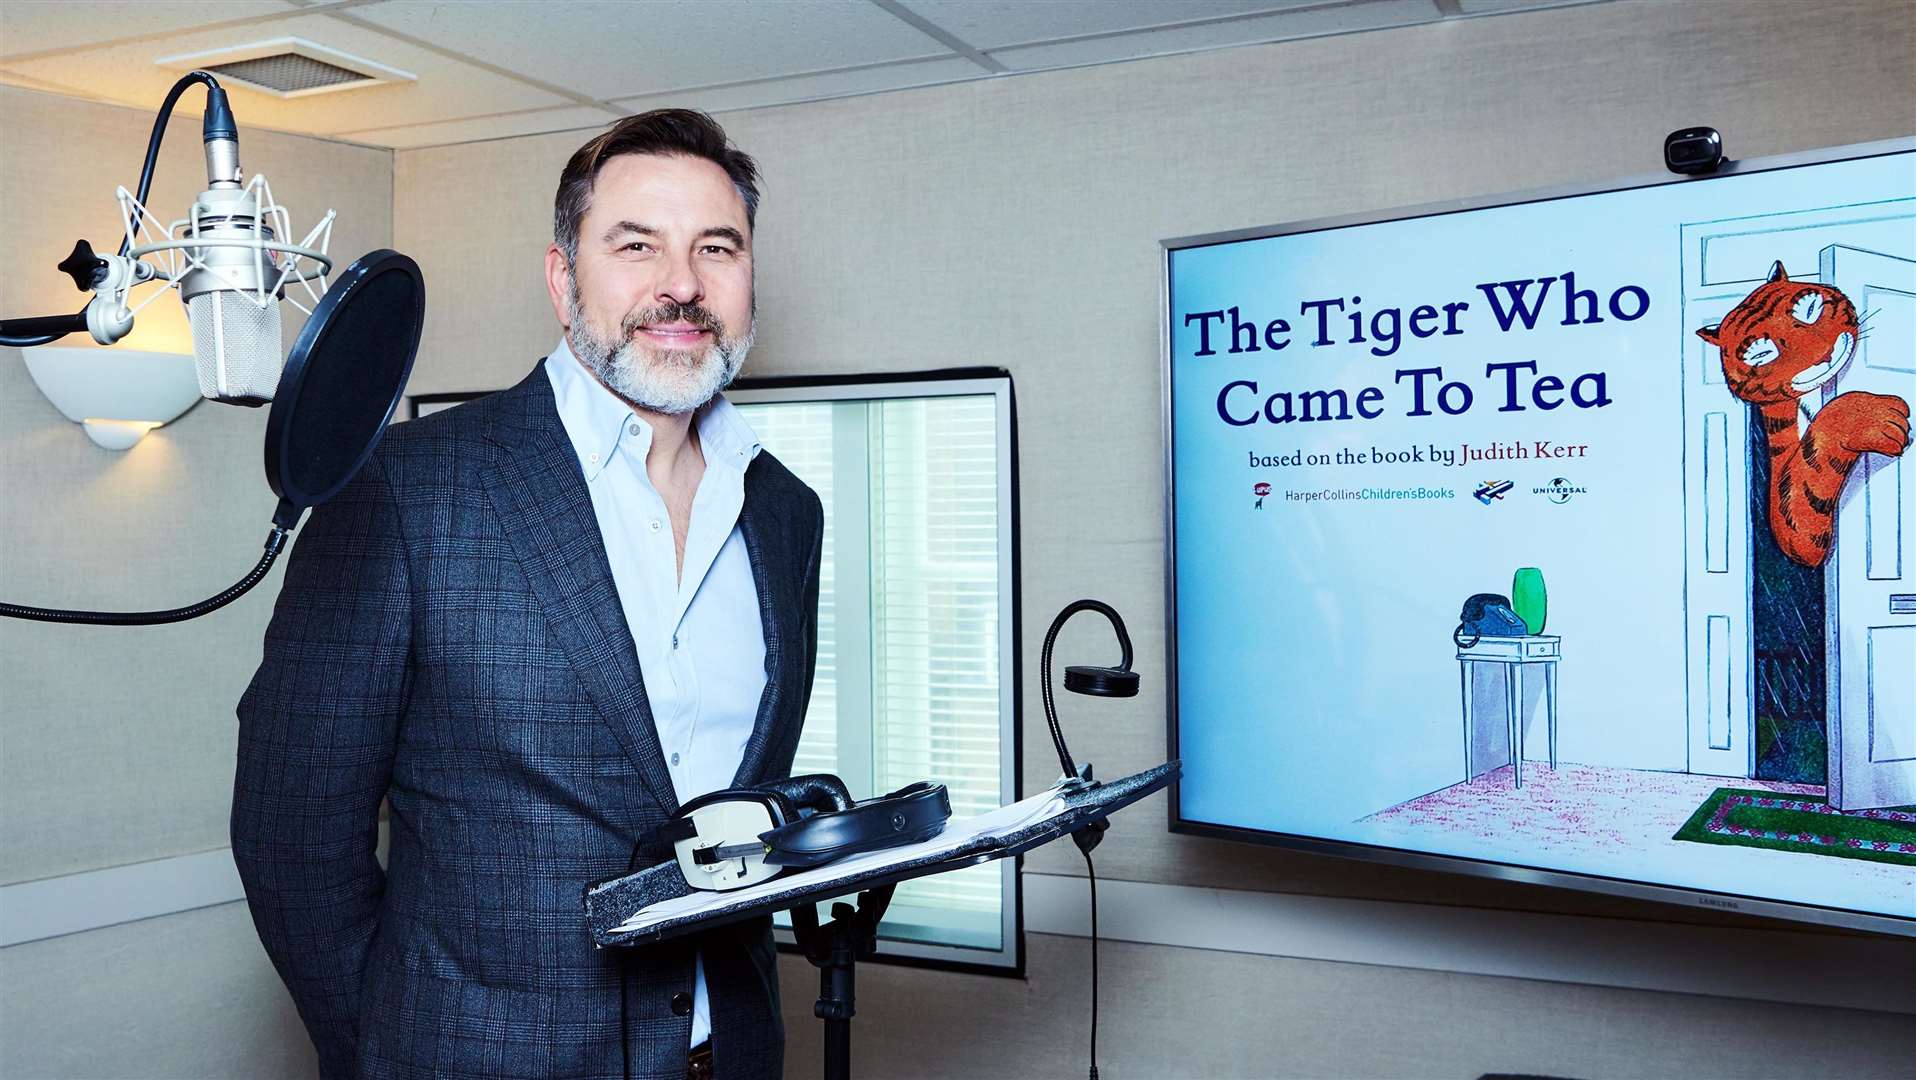 David Walliams is part of the team behind The Tiger Who Came to Tea animation